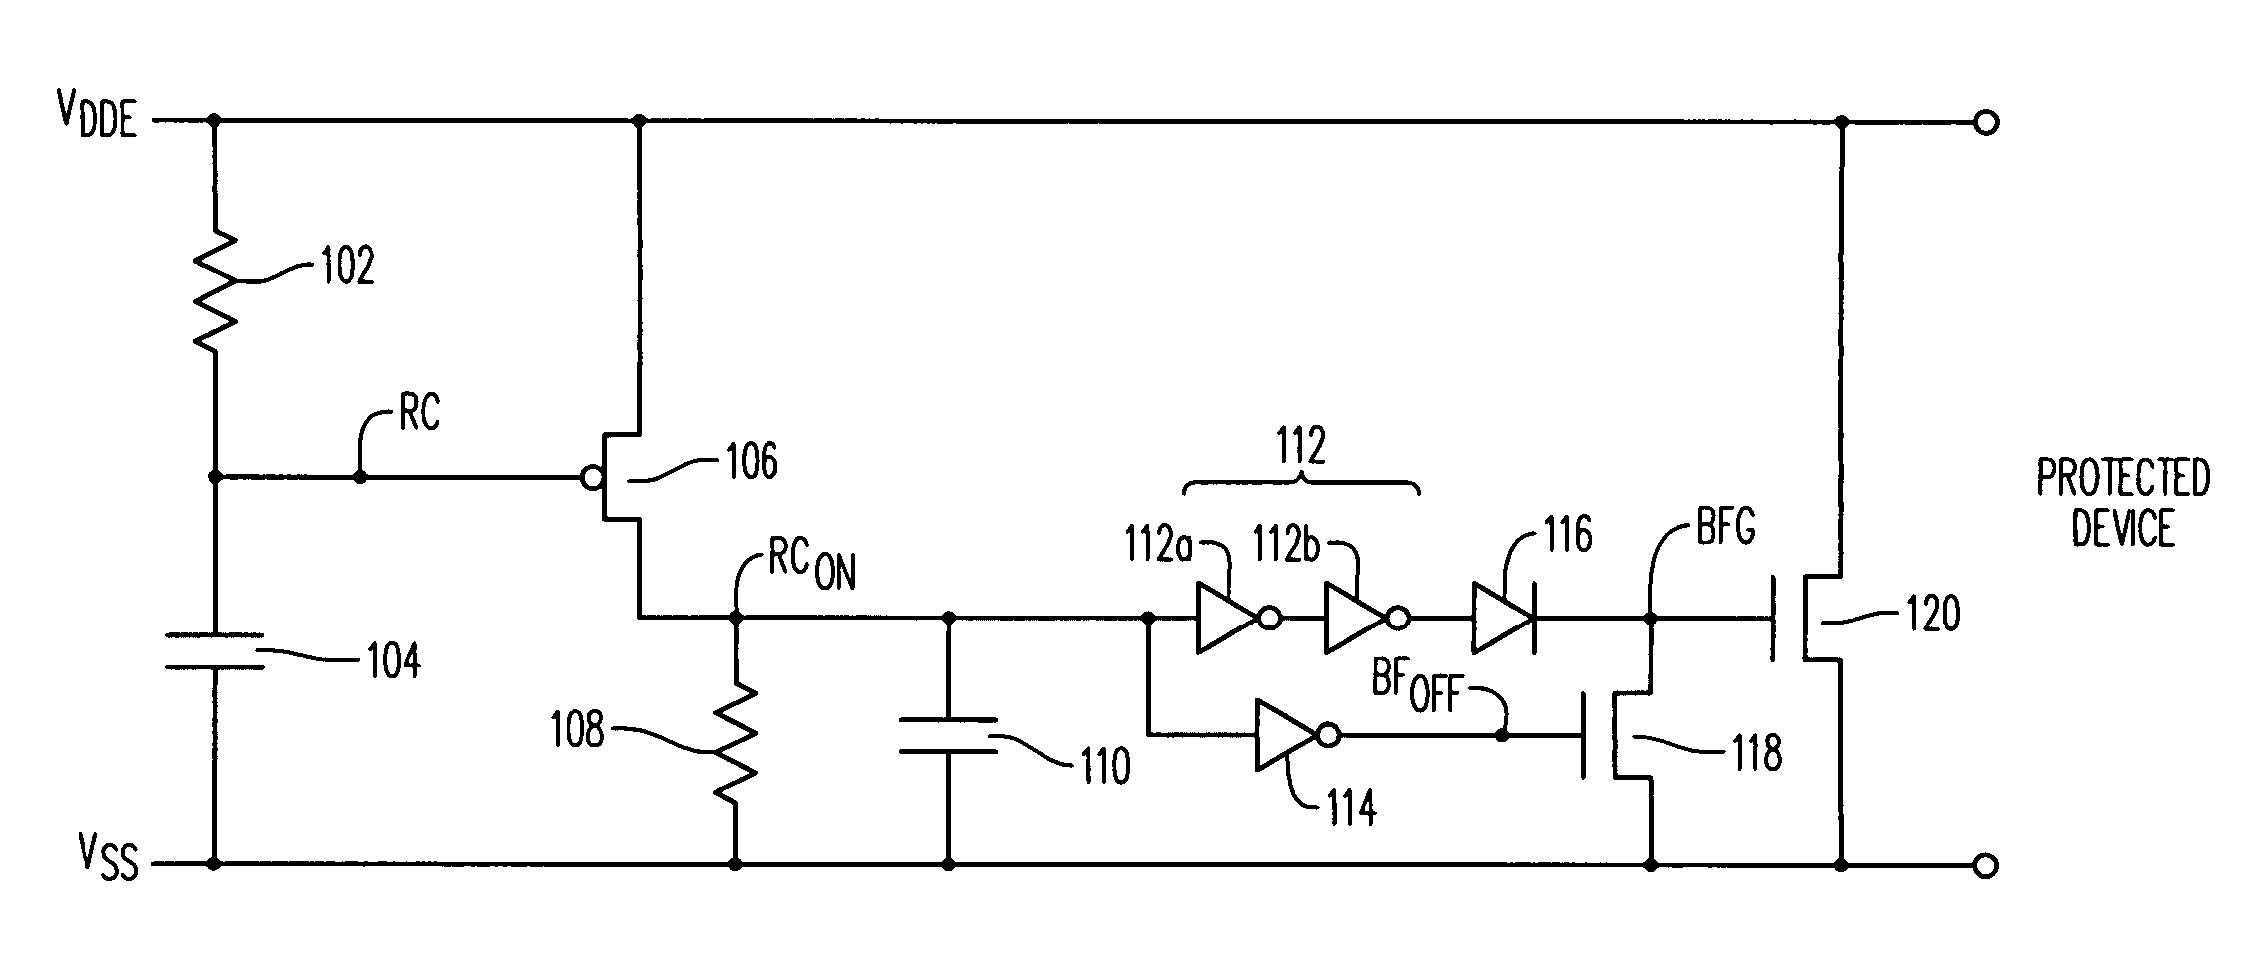 Electrostatic discharge device with variable on time